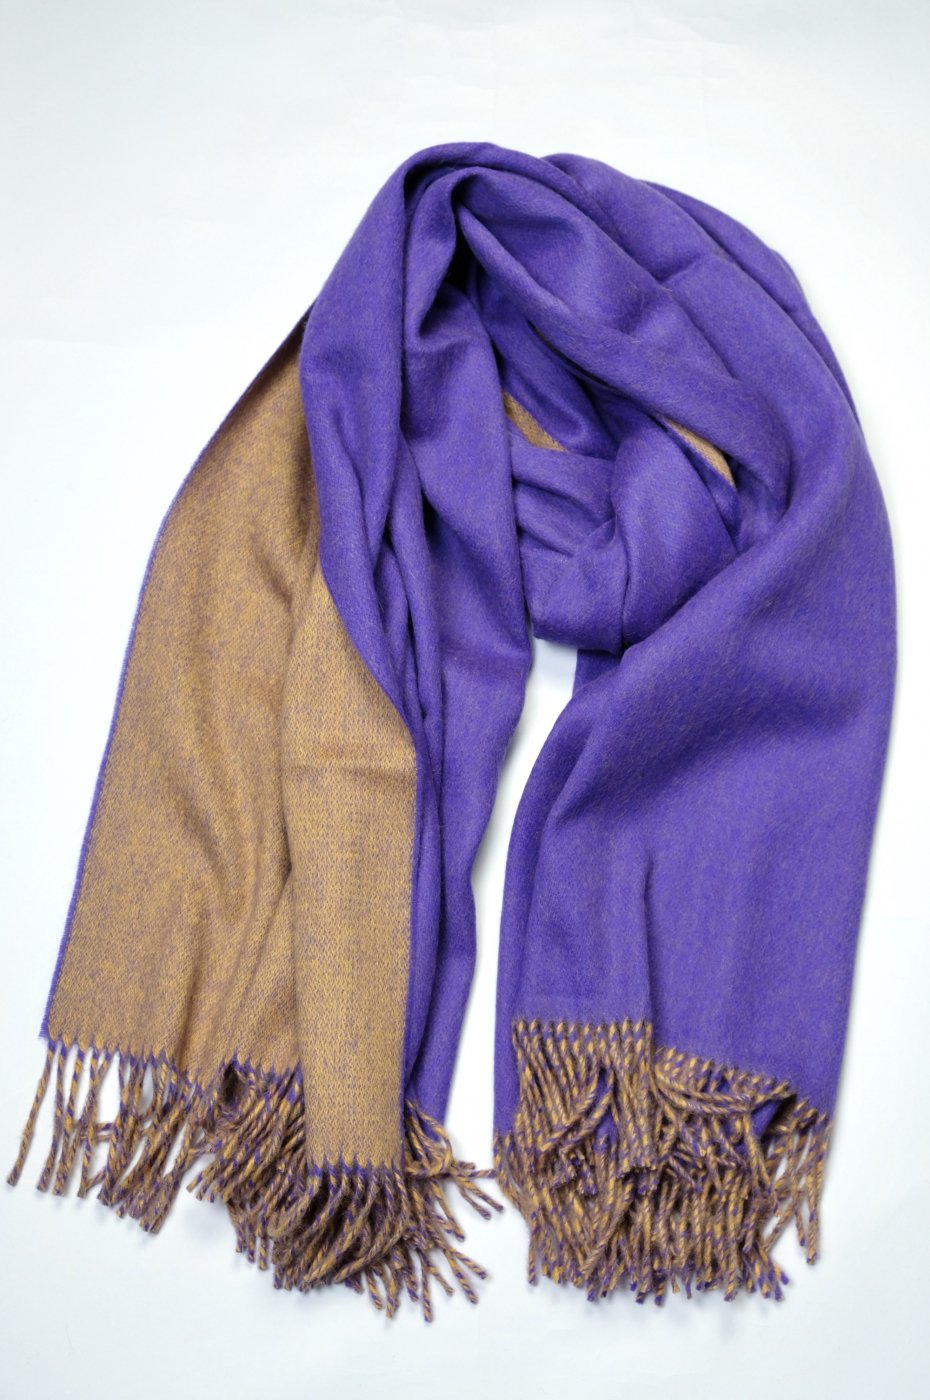 THE INOUE BROTHERS... "DOUBLE FACED LARGE BRUSHED STOLE/PURPLE×YELLOW"